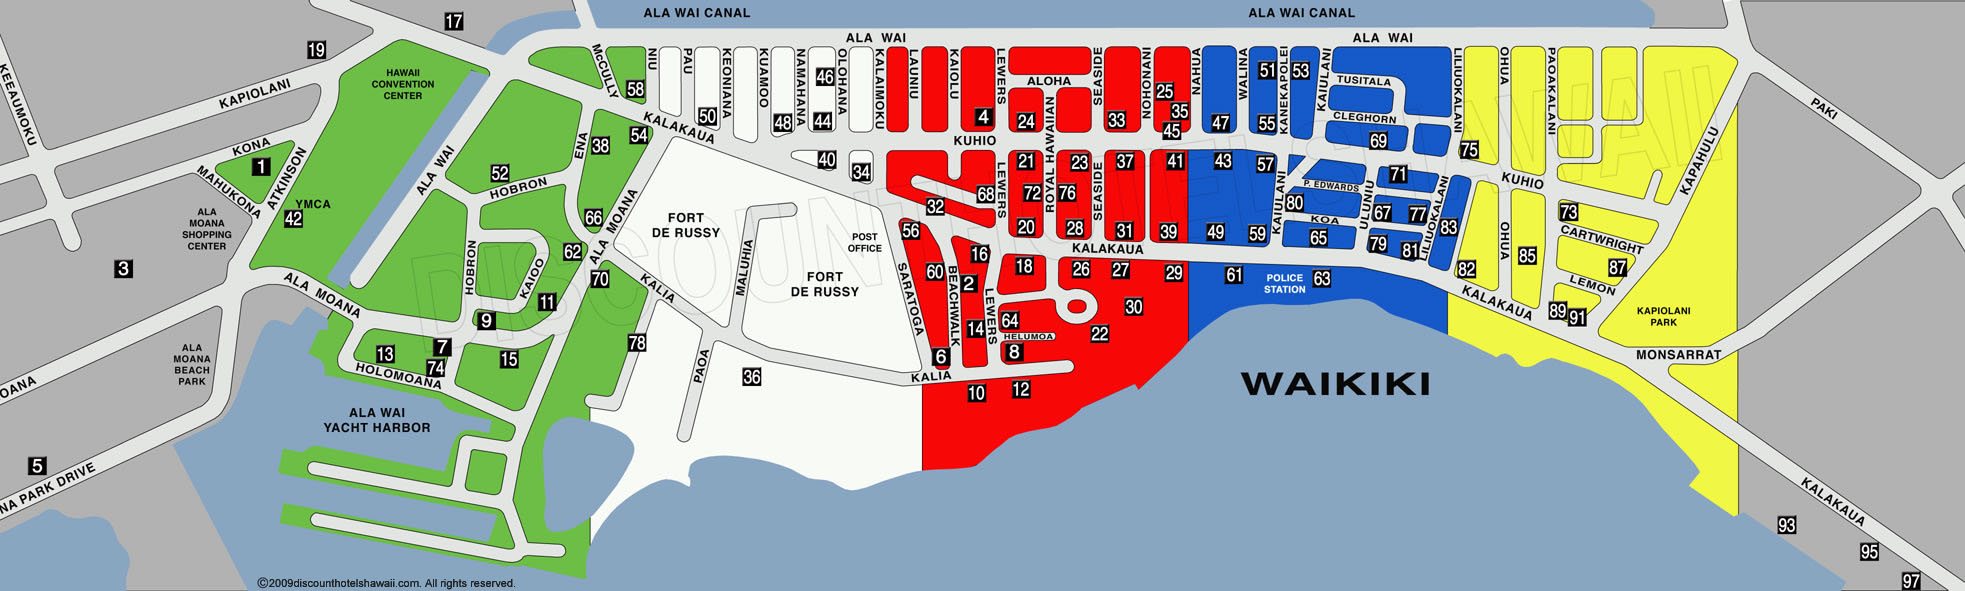 Map of Waikiki with hotel locations